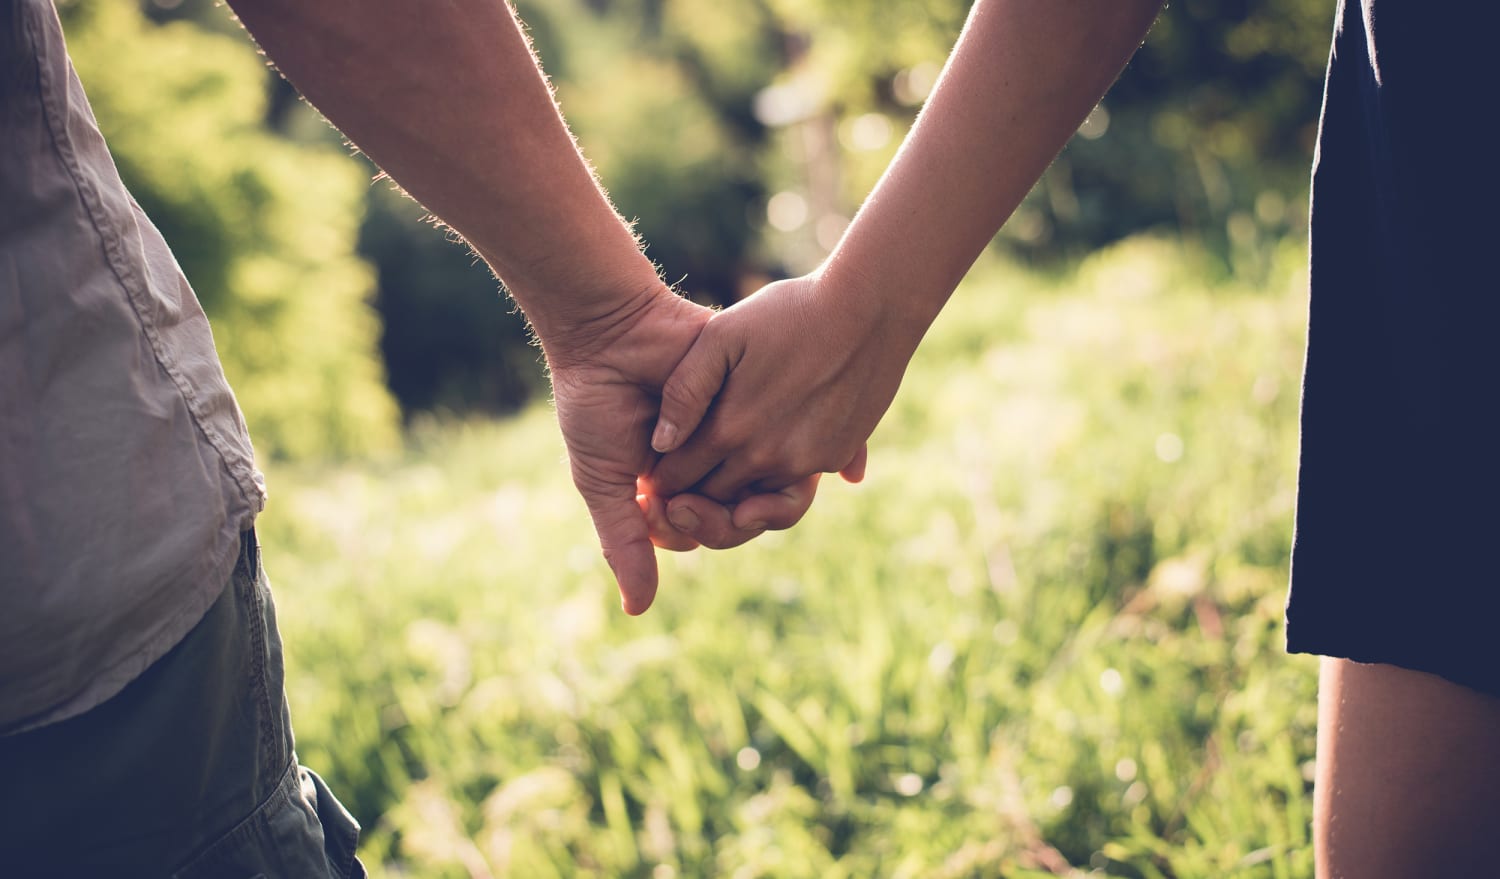 Relationship need a boost? Try these tips to strengthen it